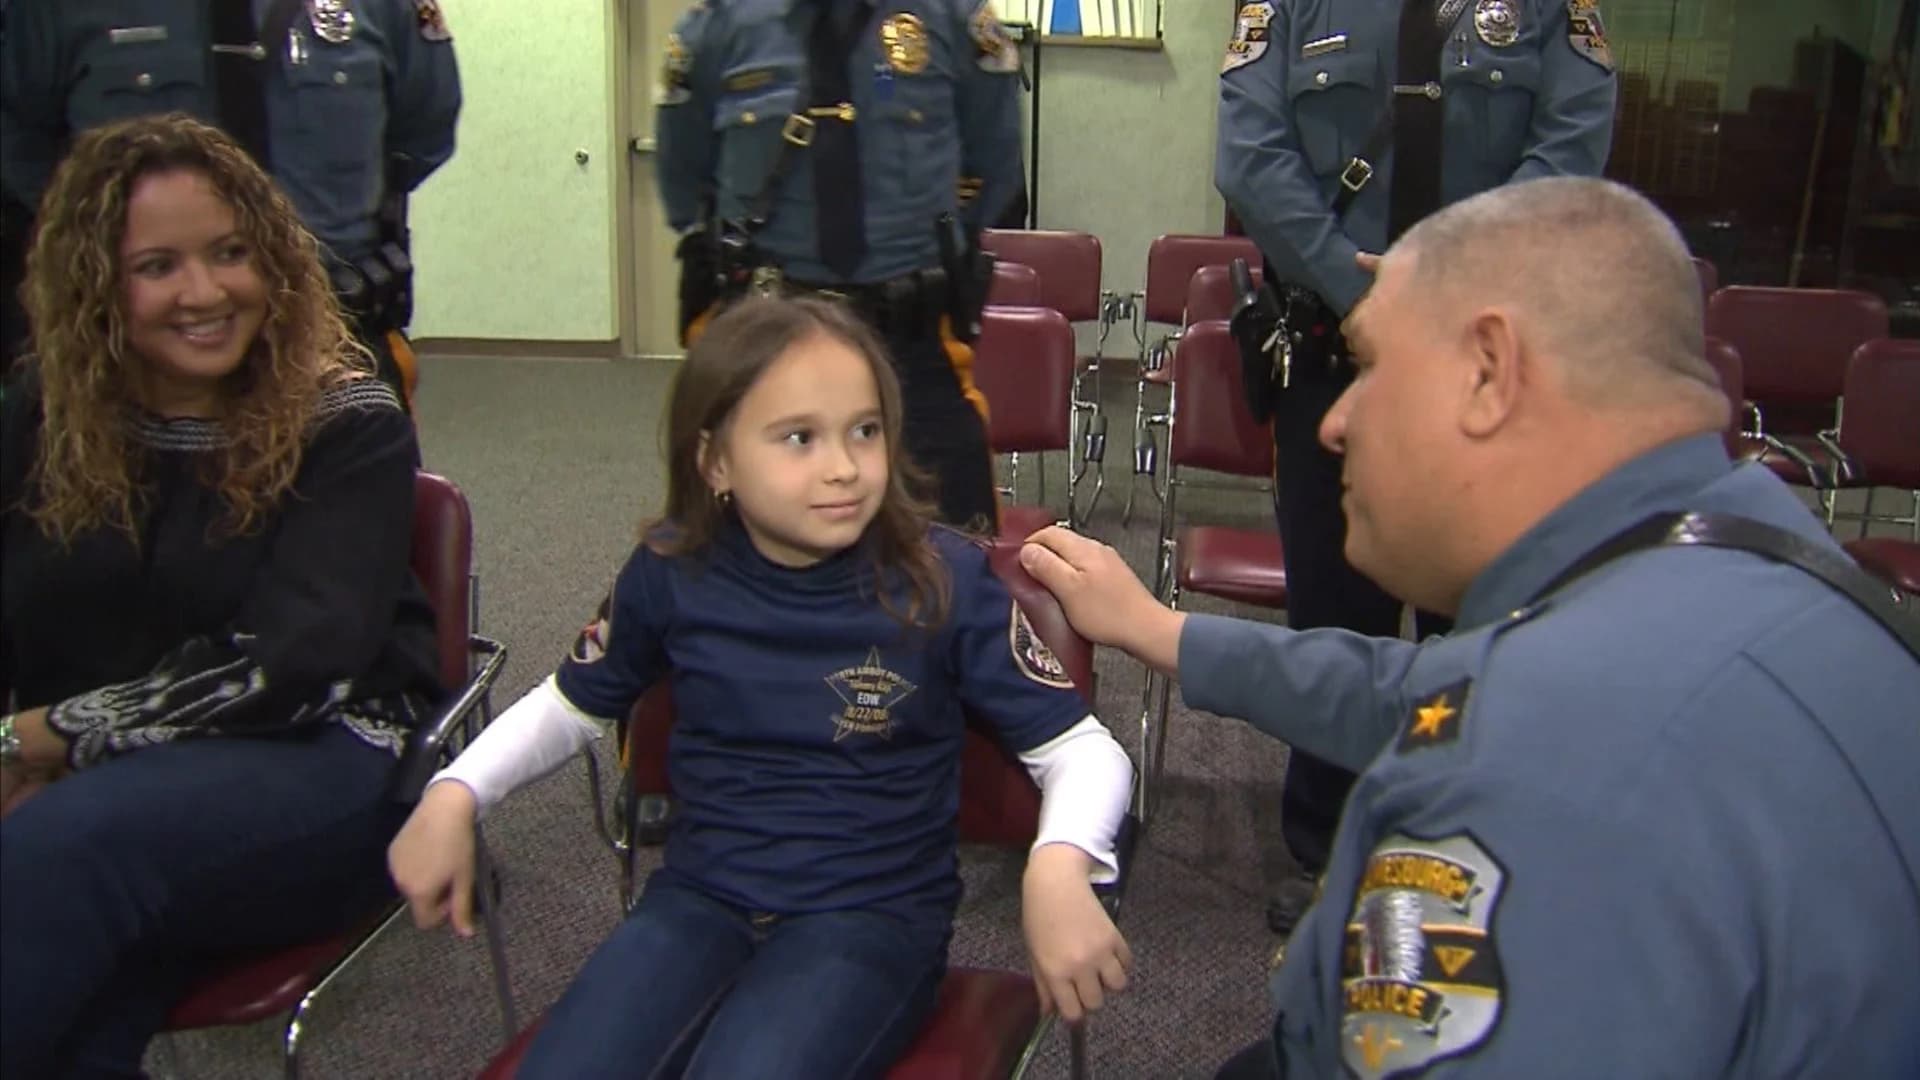 Girl whose father was killed in line of duty pays for Jamesburg police officer’s dinner